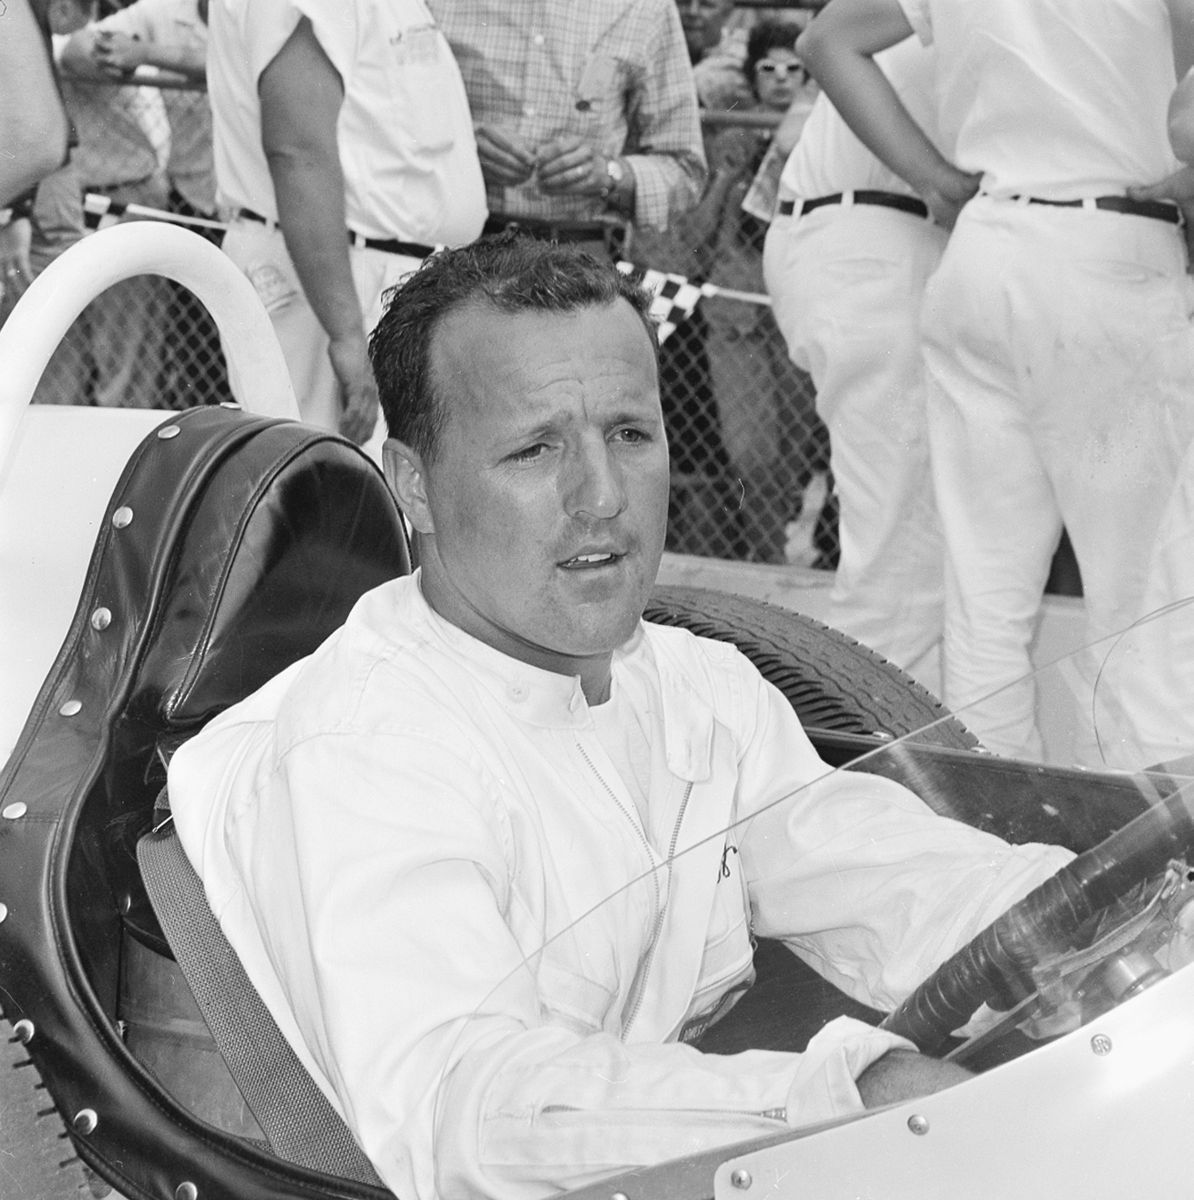 Gallery: Indianapolis 500 in the 1960s | Indy 500 | nwitimes.com